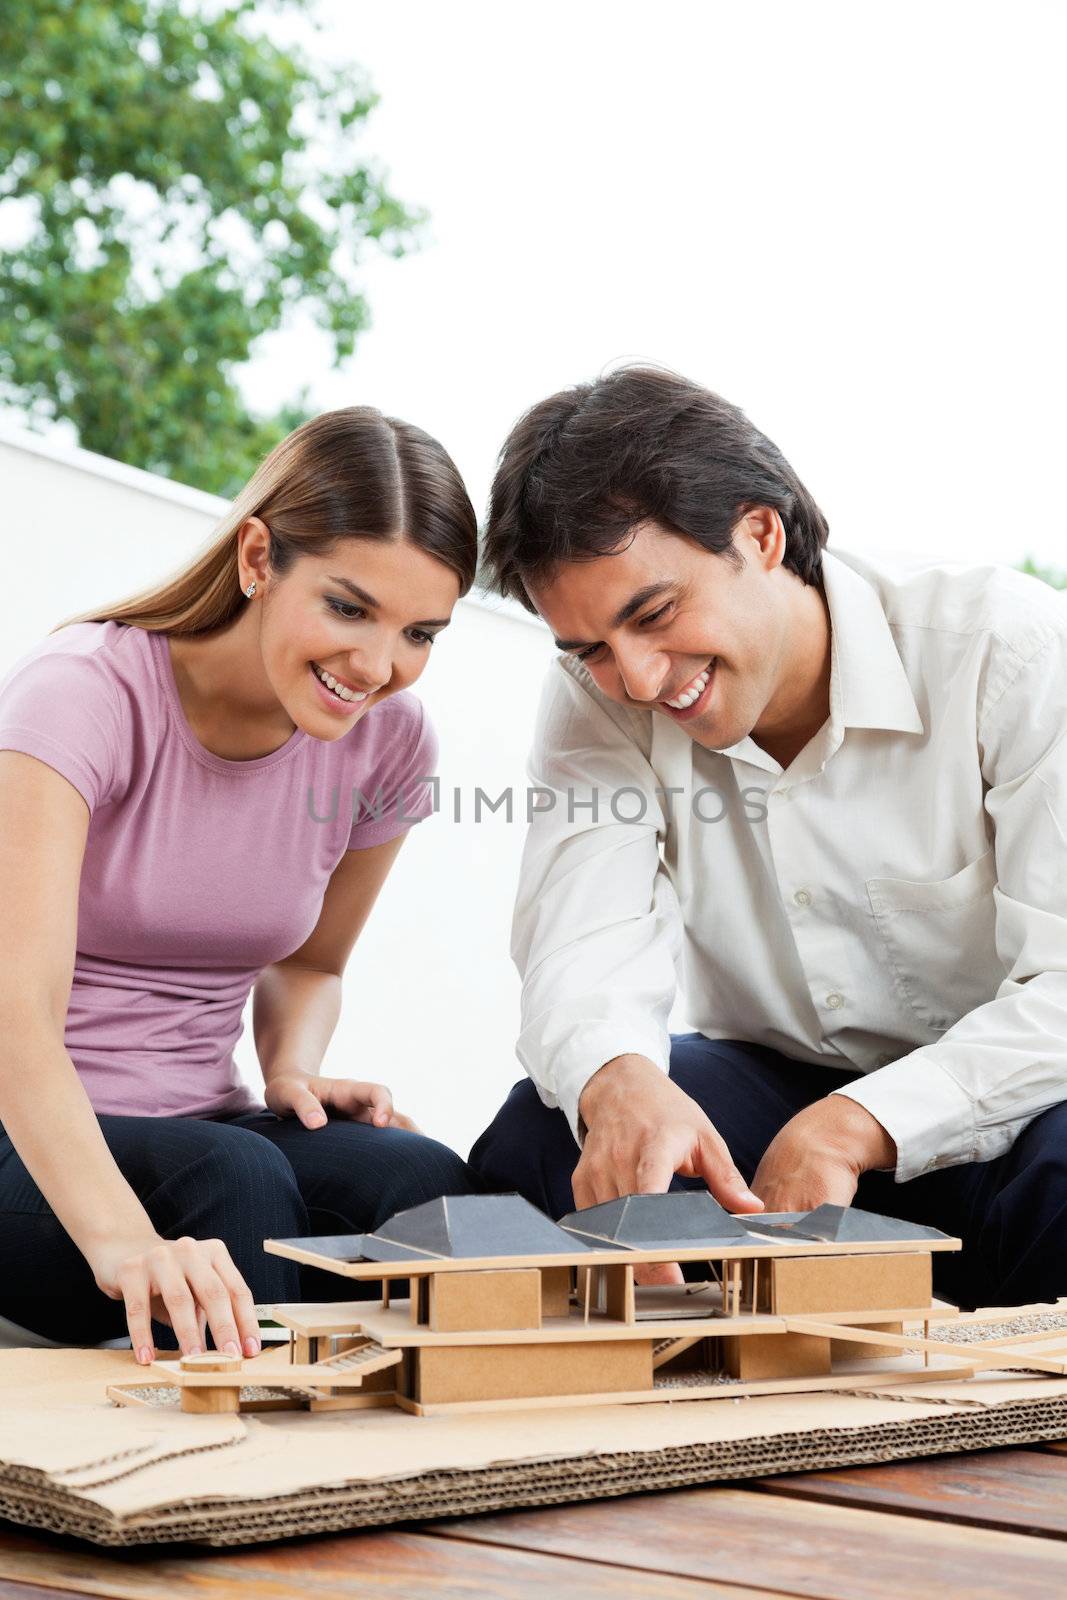 Happy young architects working on a wooden model house together